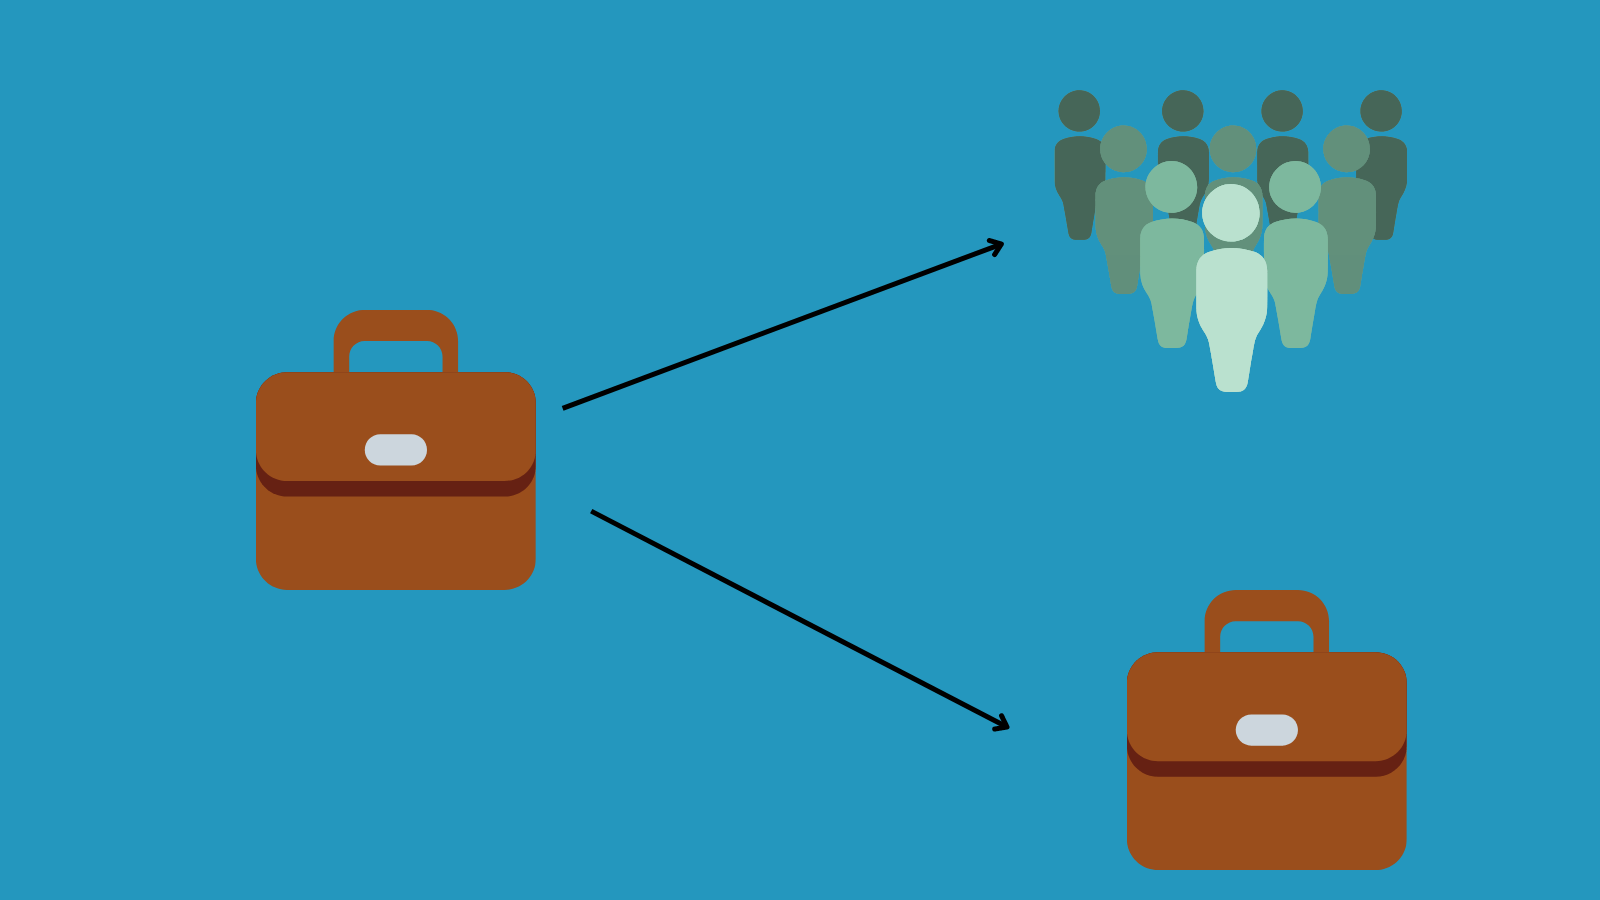 A briefcase with one arrow pointing towards a crowd and one arrow pointing towards another briefcase